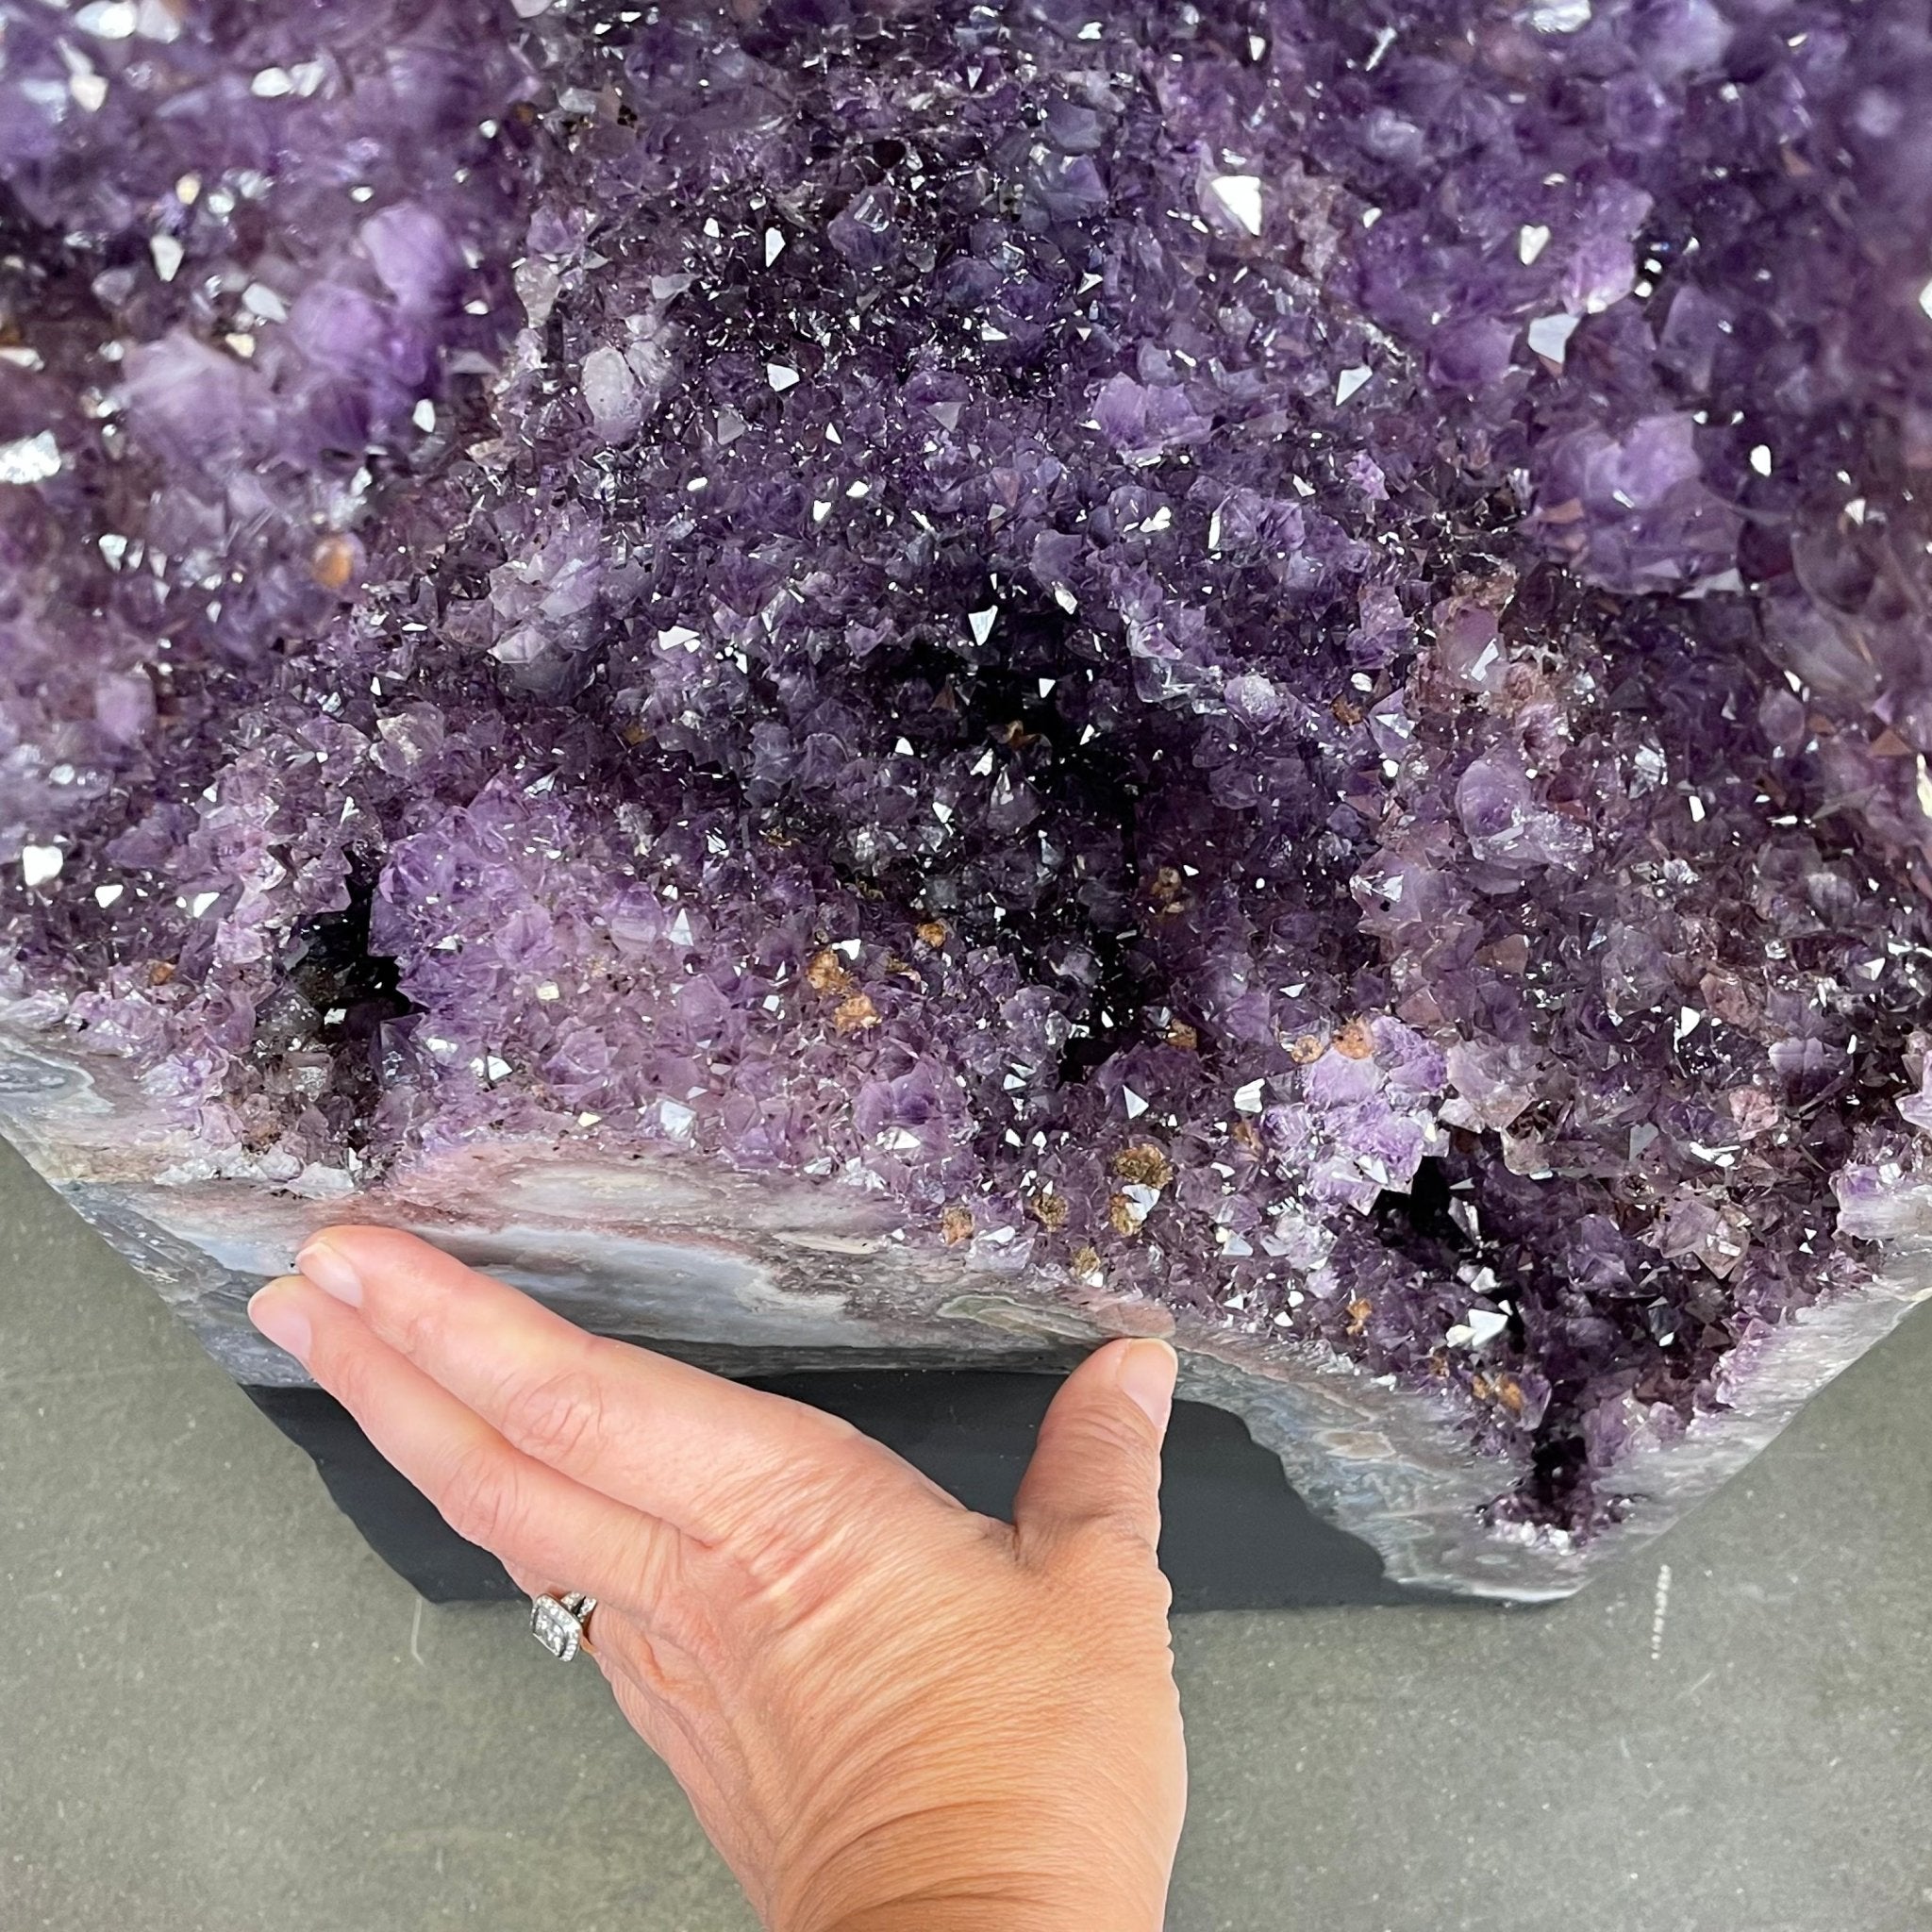 Large Extra Plus Quality Brazilian Amethyst Cathedral, 191.8 lbs & 67.75" Tall #5601-1198 by Brazil Gems - Brazil GemsBrazil GemsLarge Extra Plus Quality Brazilian Amethyst Cathedral, 191.8 lbs & 67.75" Tall #5601-1198 by Brazil GemsCathedrals5601-1198